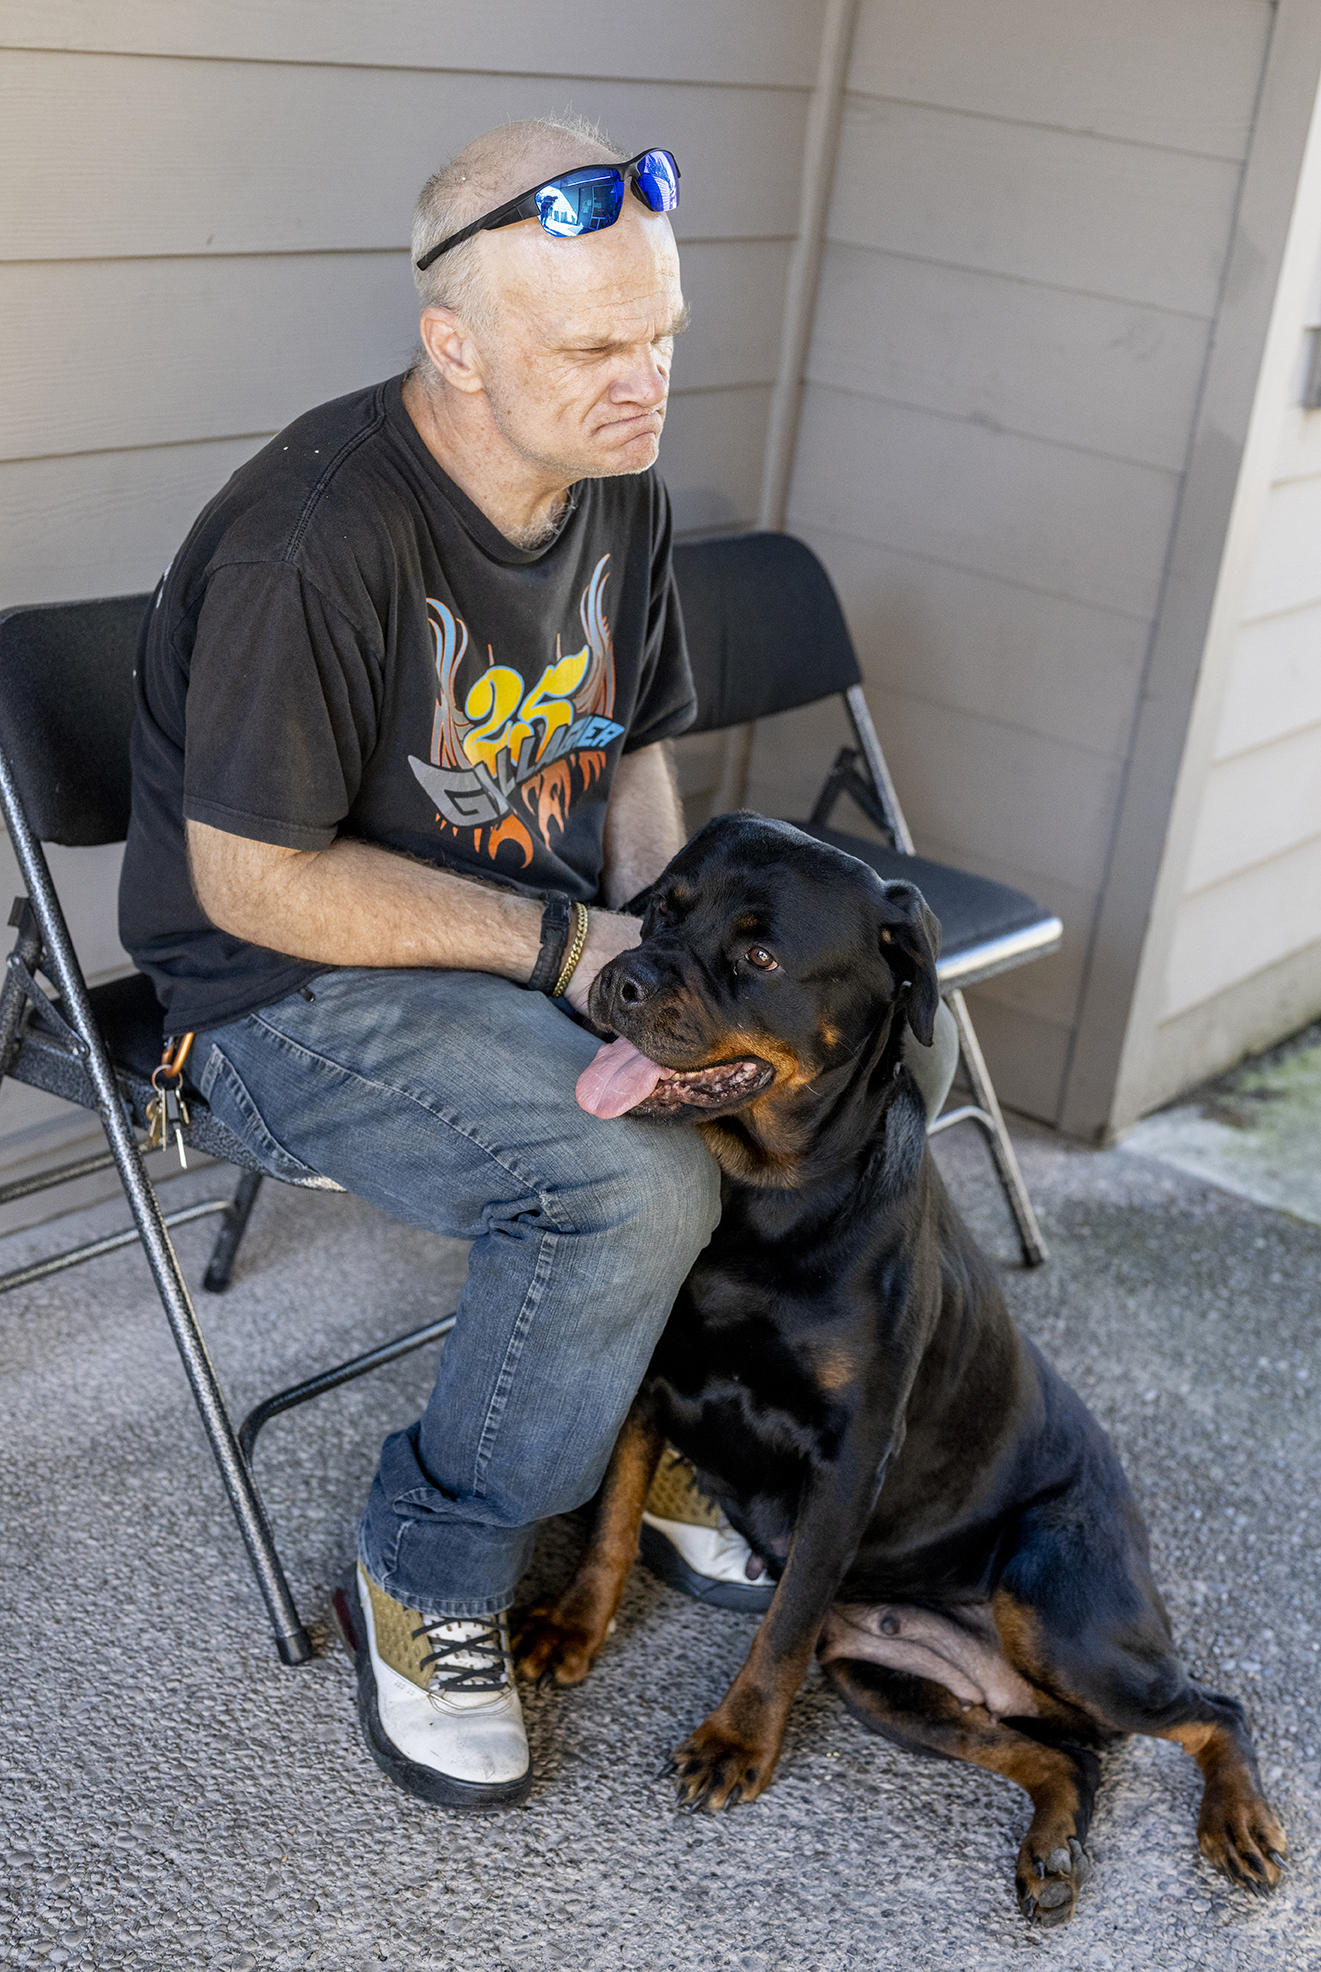 Steve sits in a plastic folding chair with his dog, Mamas, a black Rottweiler resting her head on his knee and leaning against him.